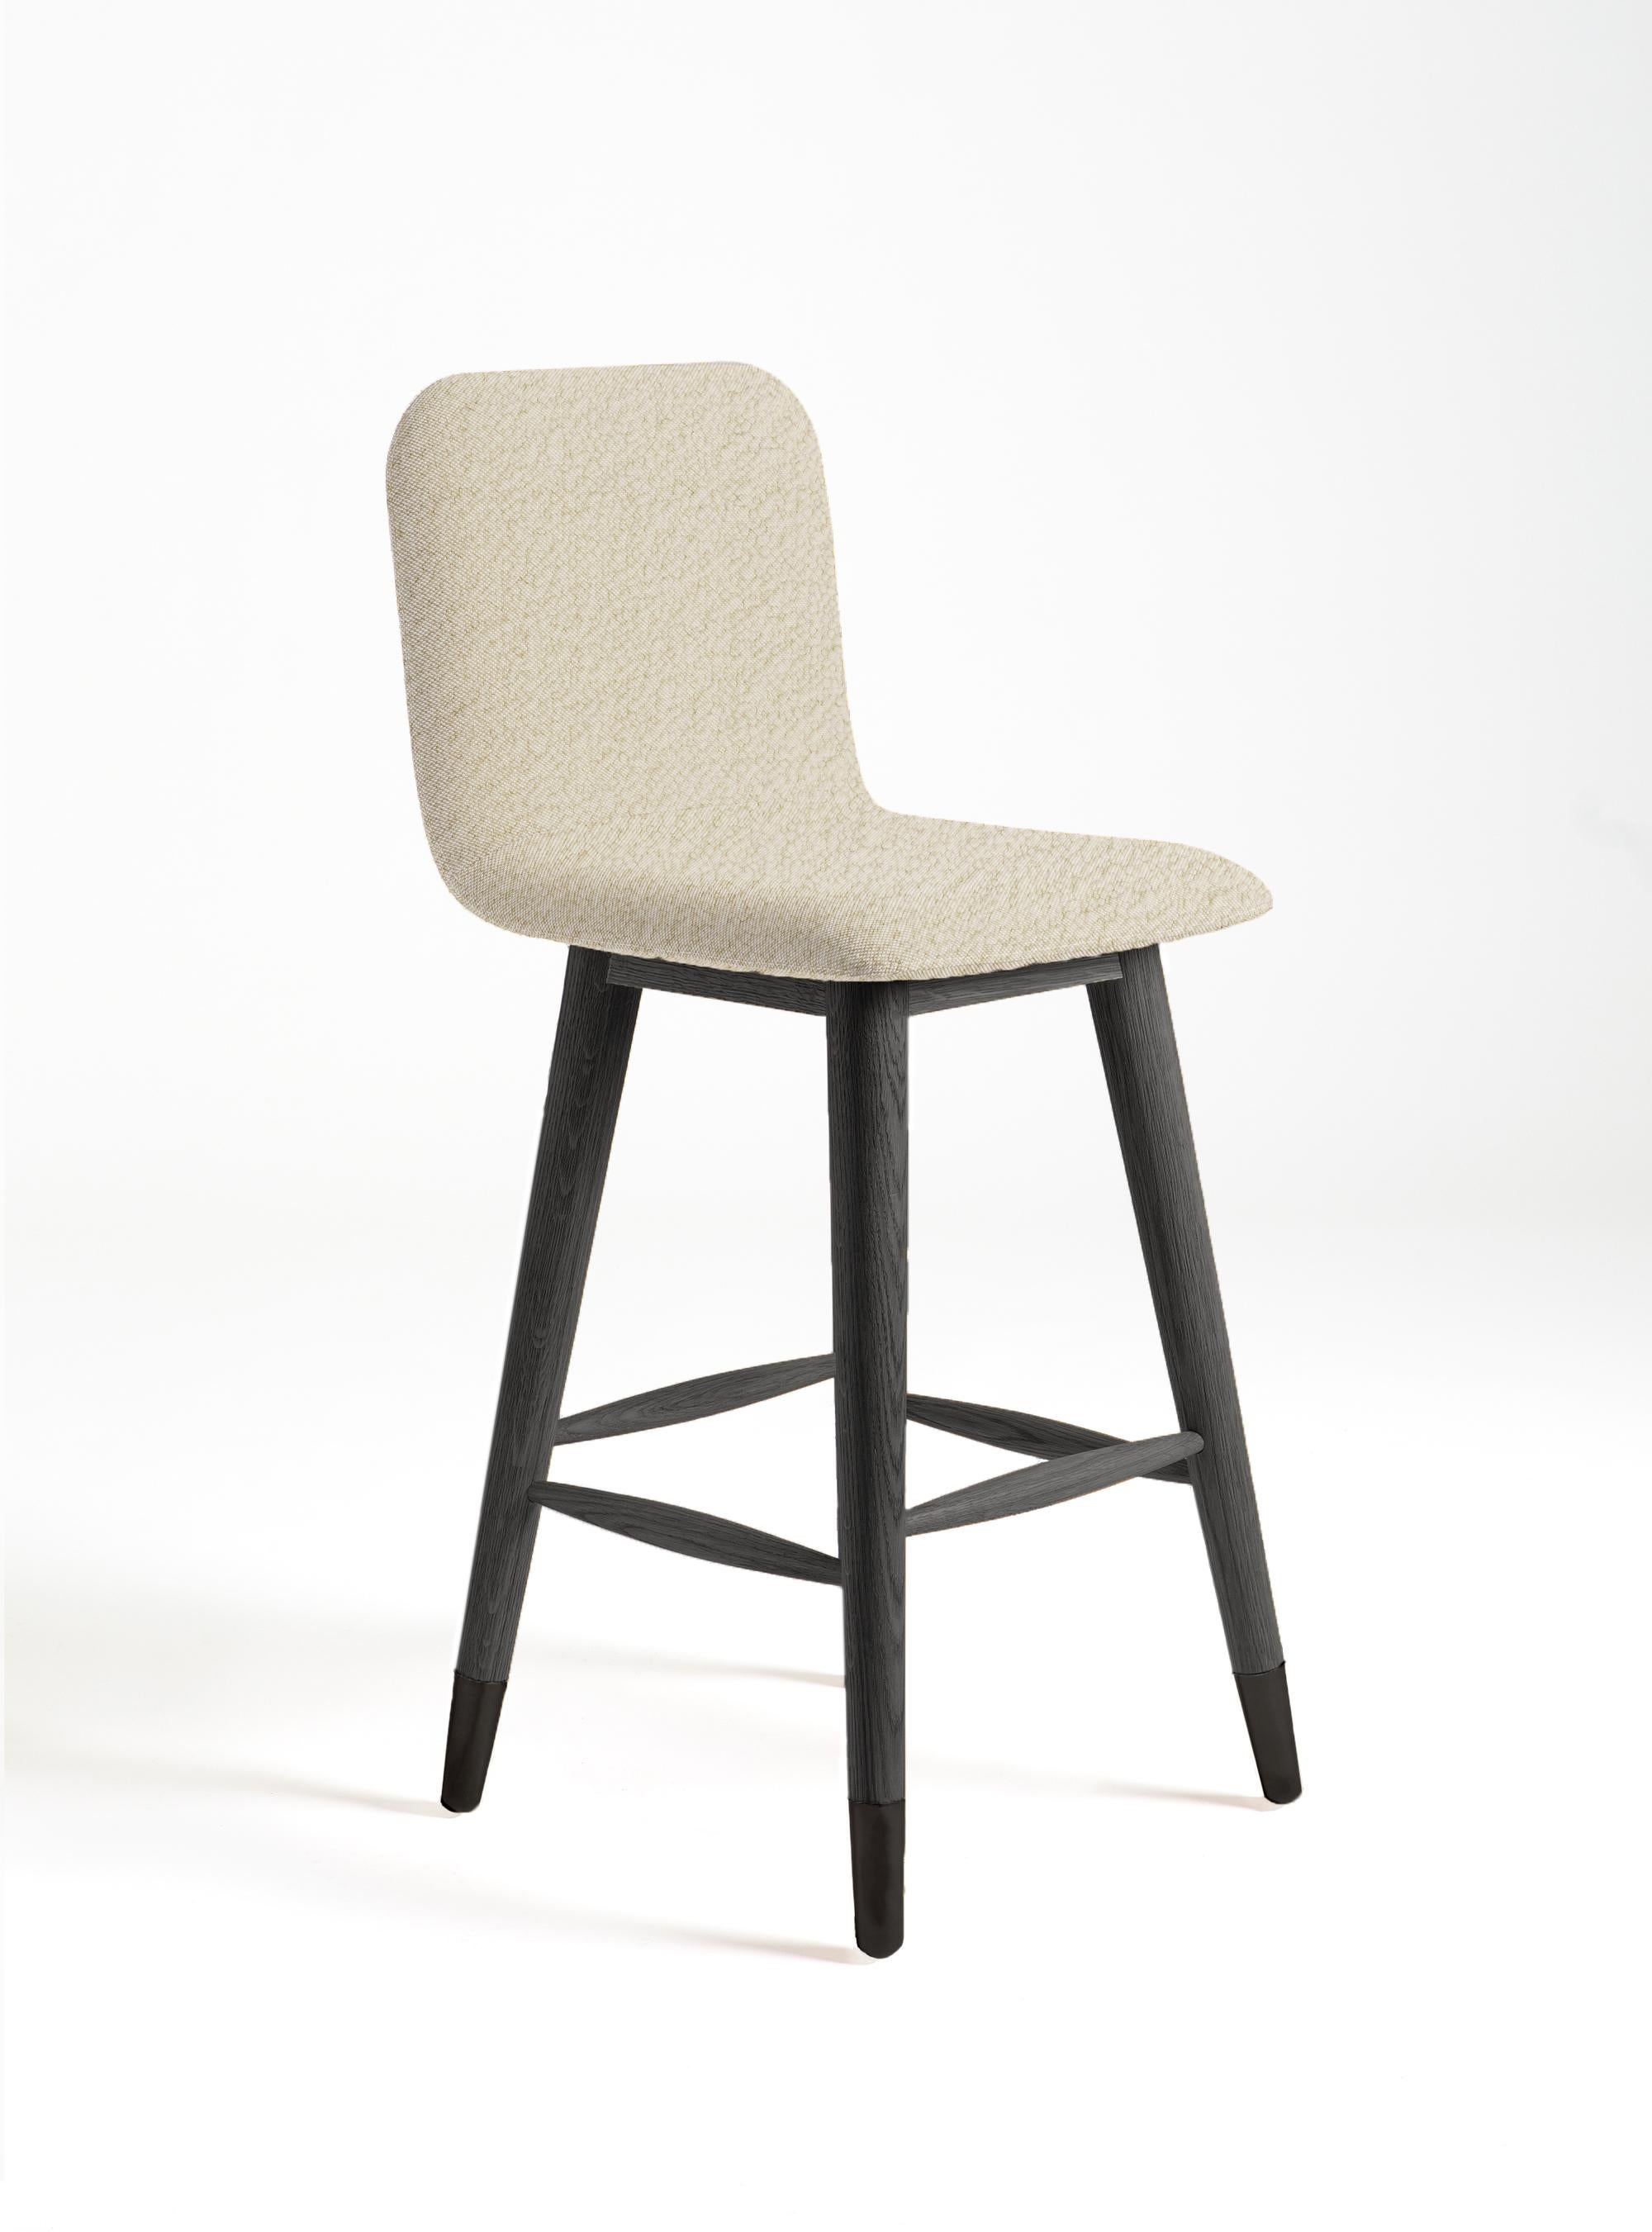 Mistral bar stool is designed to bring fresh, modern, natural style to its environment. Black polished metal and black stained oak legs are combined with elegant white boucle fabric.